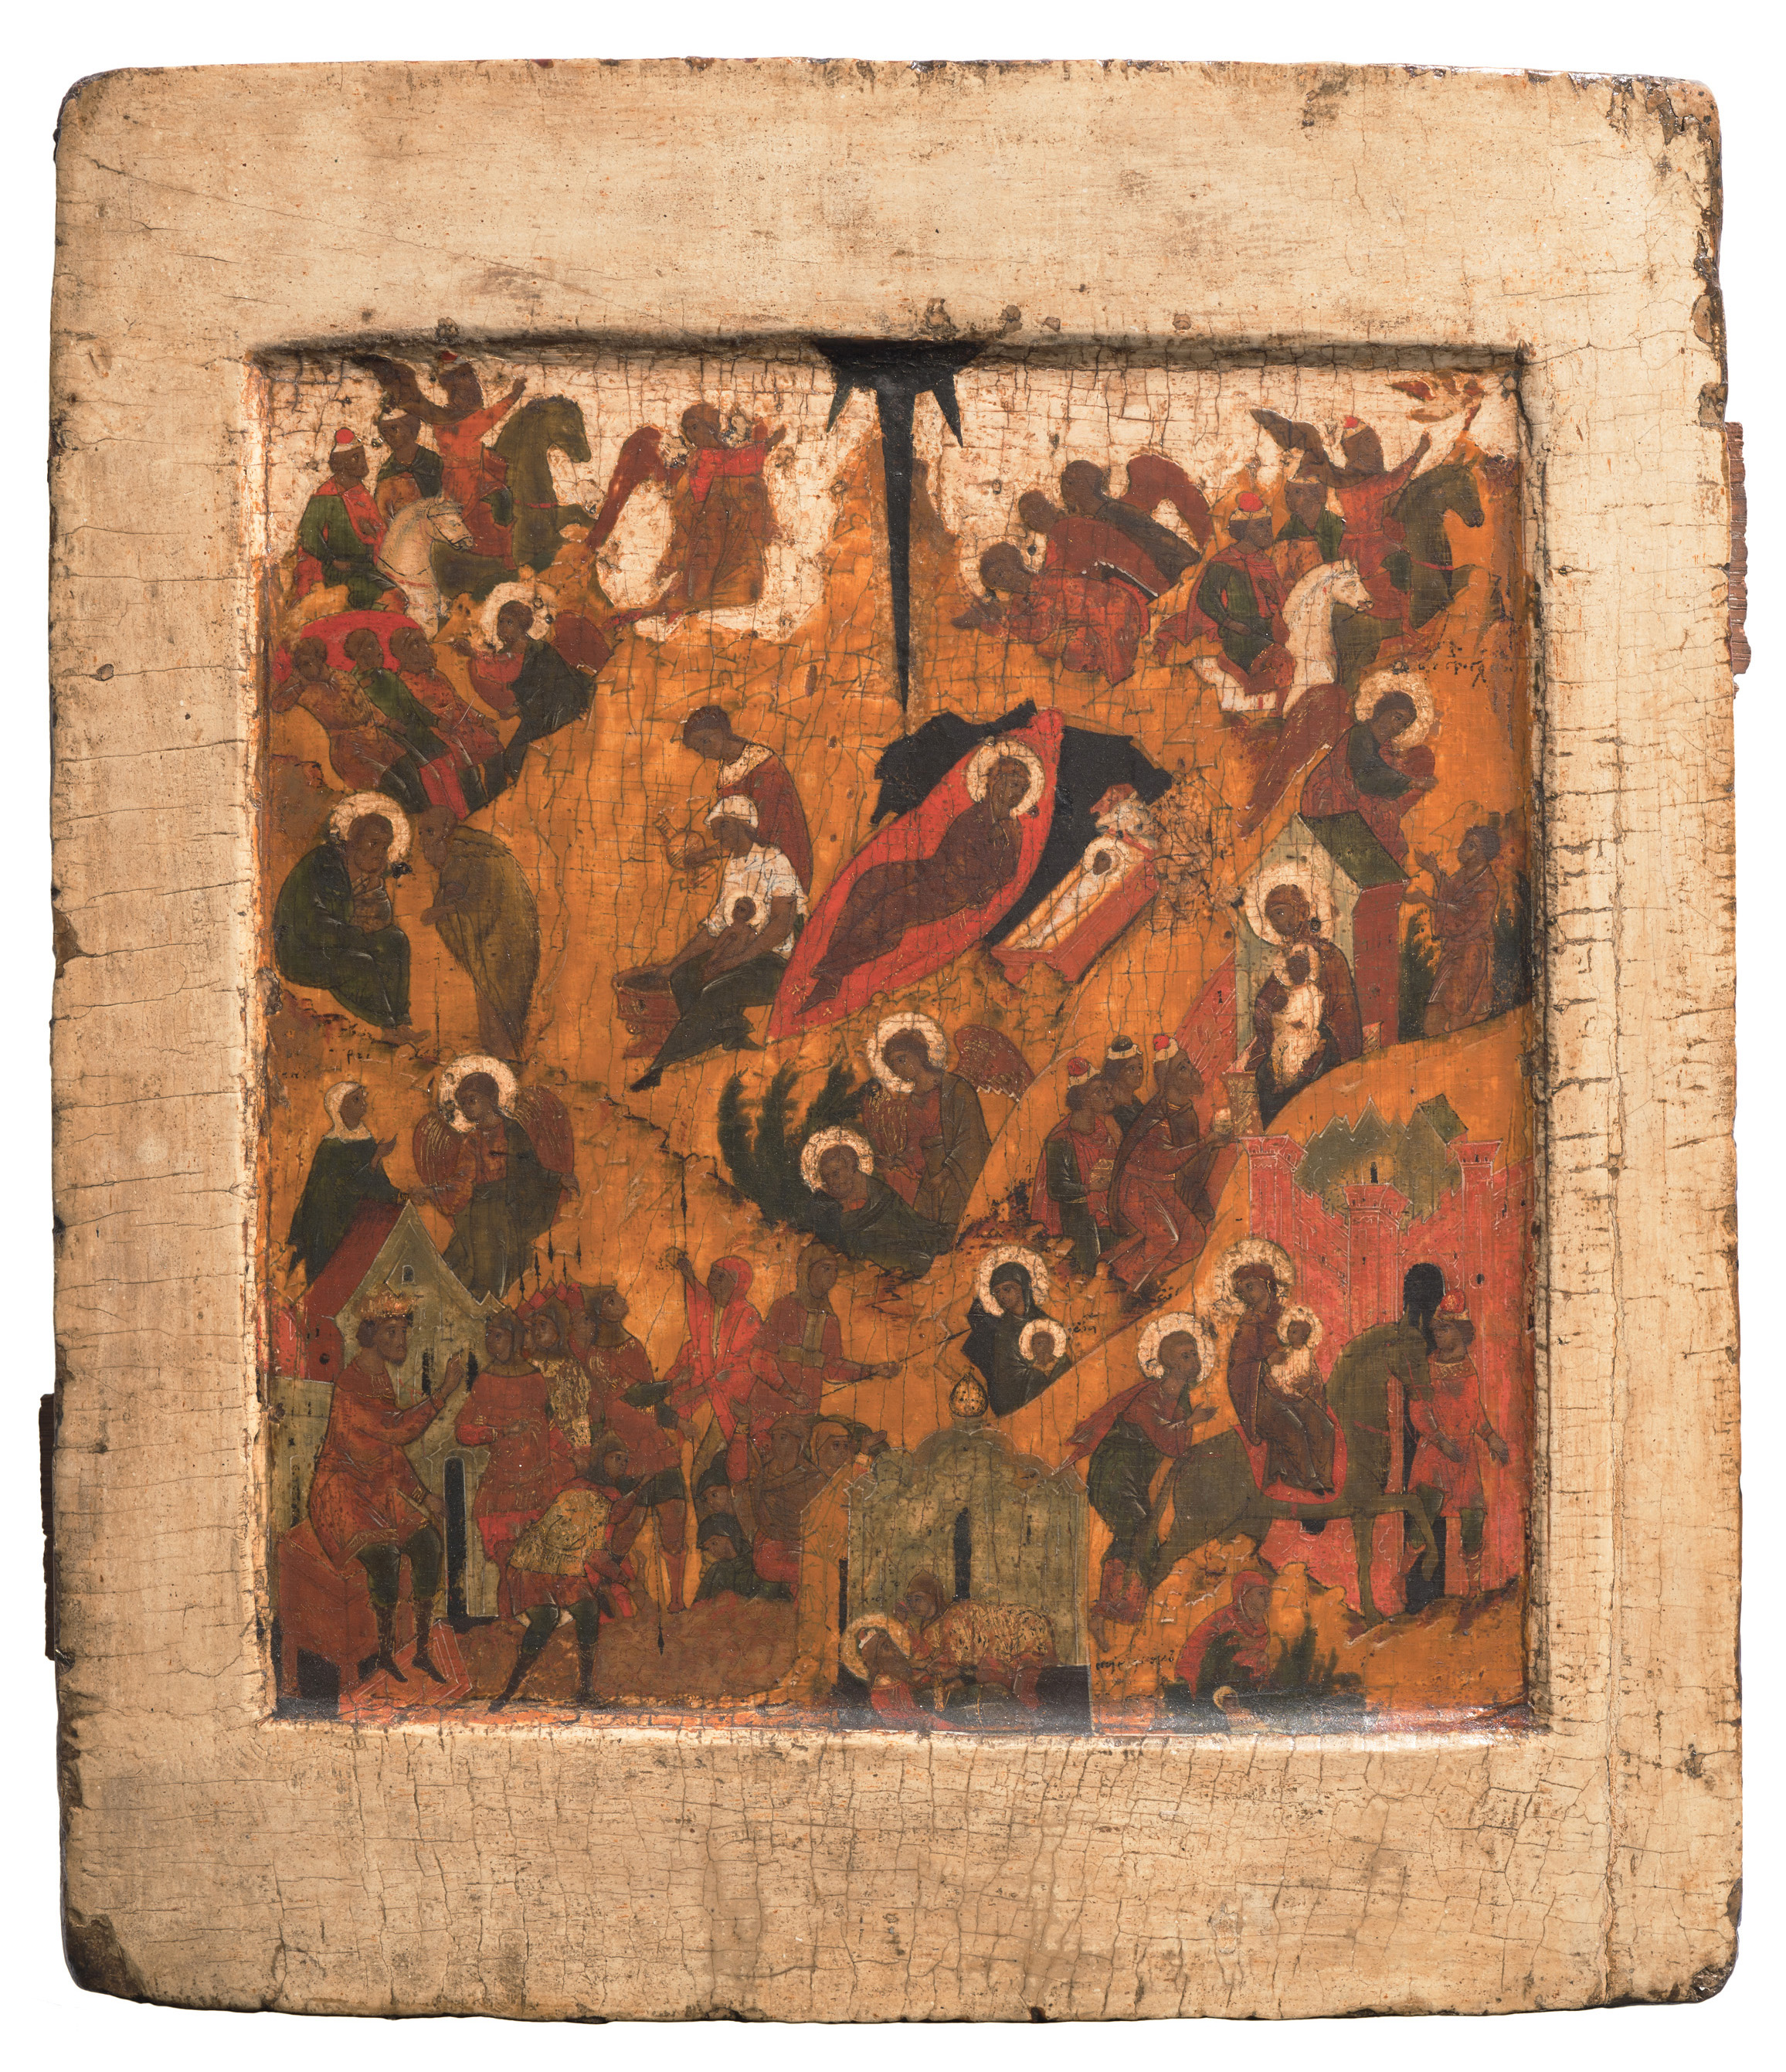 <p><em>Nativity</em>, Russia, 17th century, egg tempera and gesso on linen over wood, private collection, Canberra</p>